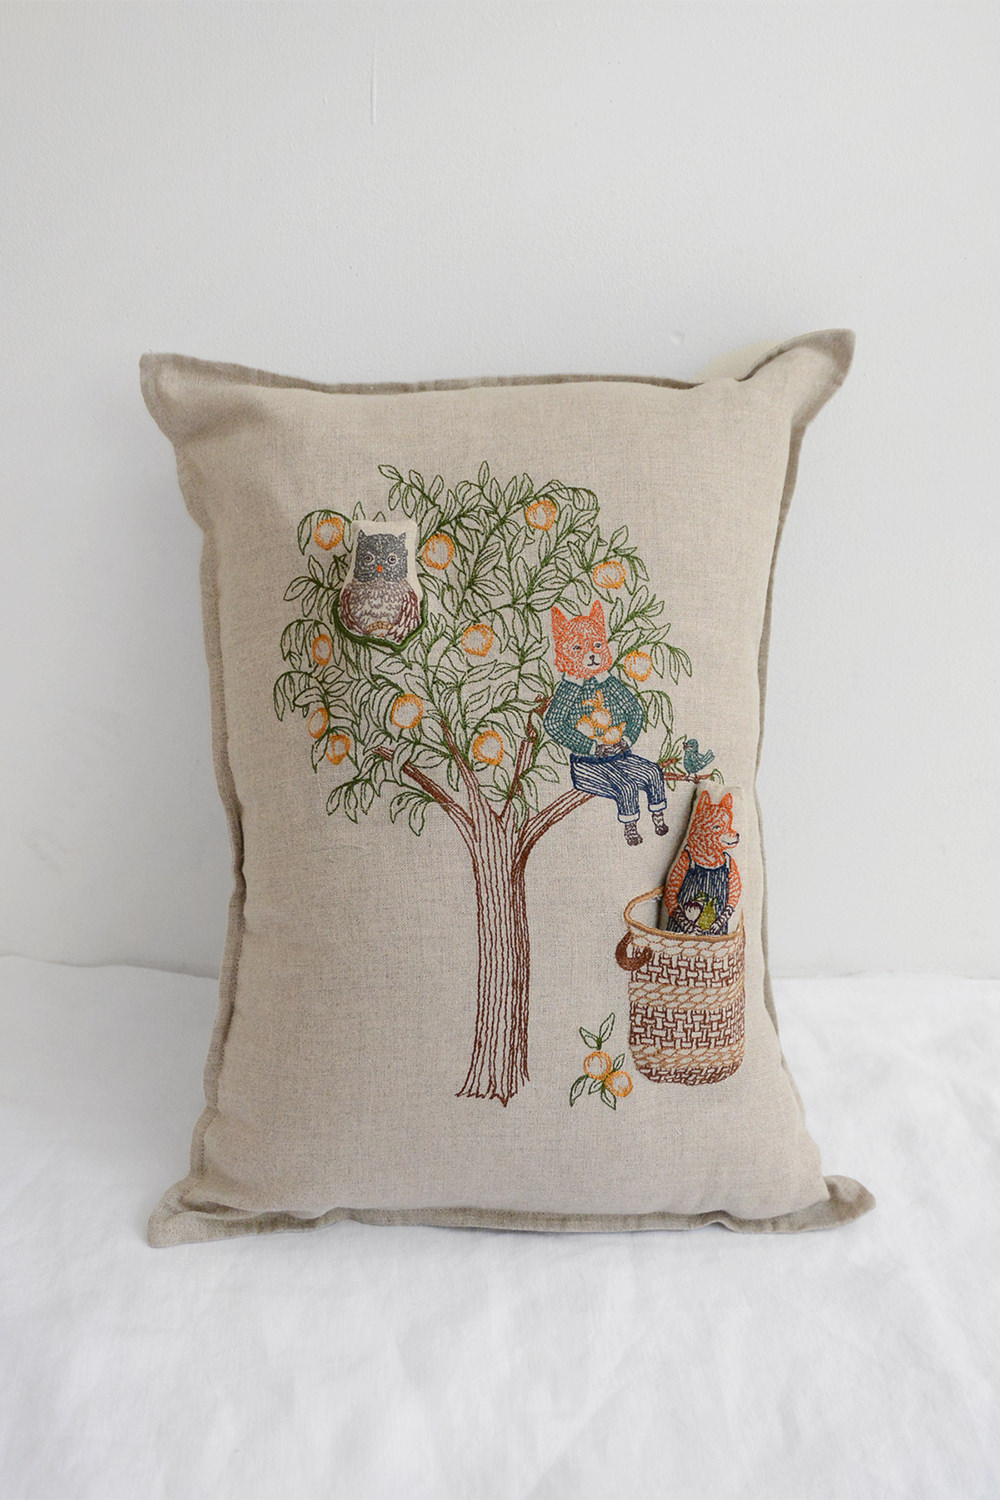 Coral and Tusk Peach Tree Pocket Pillow Top Picture